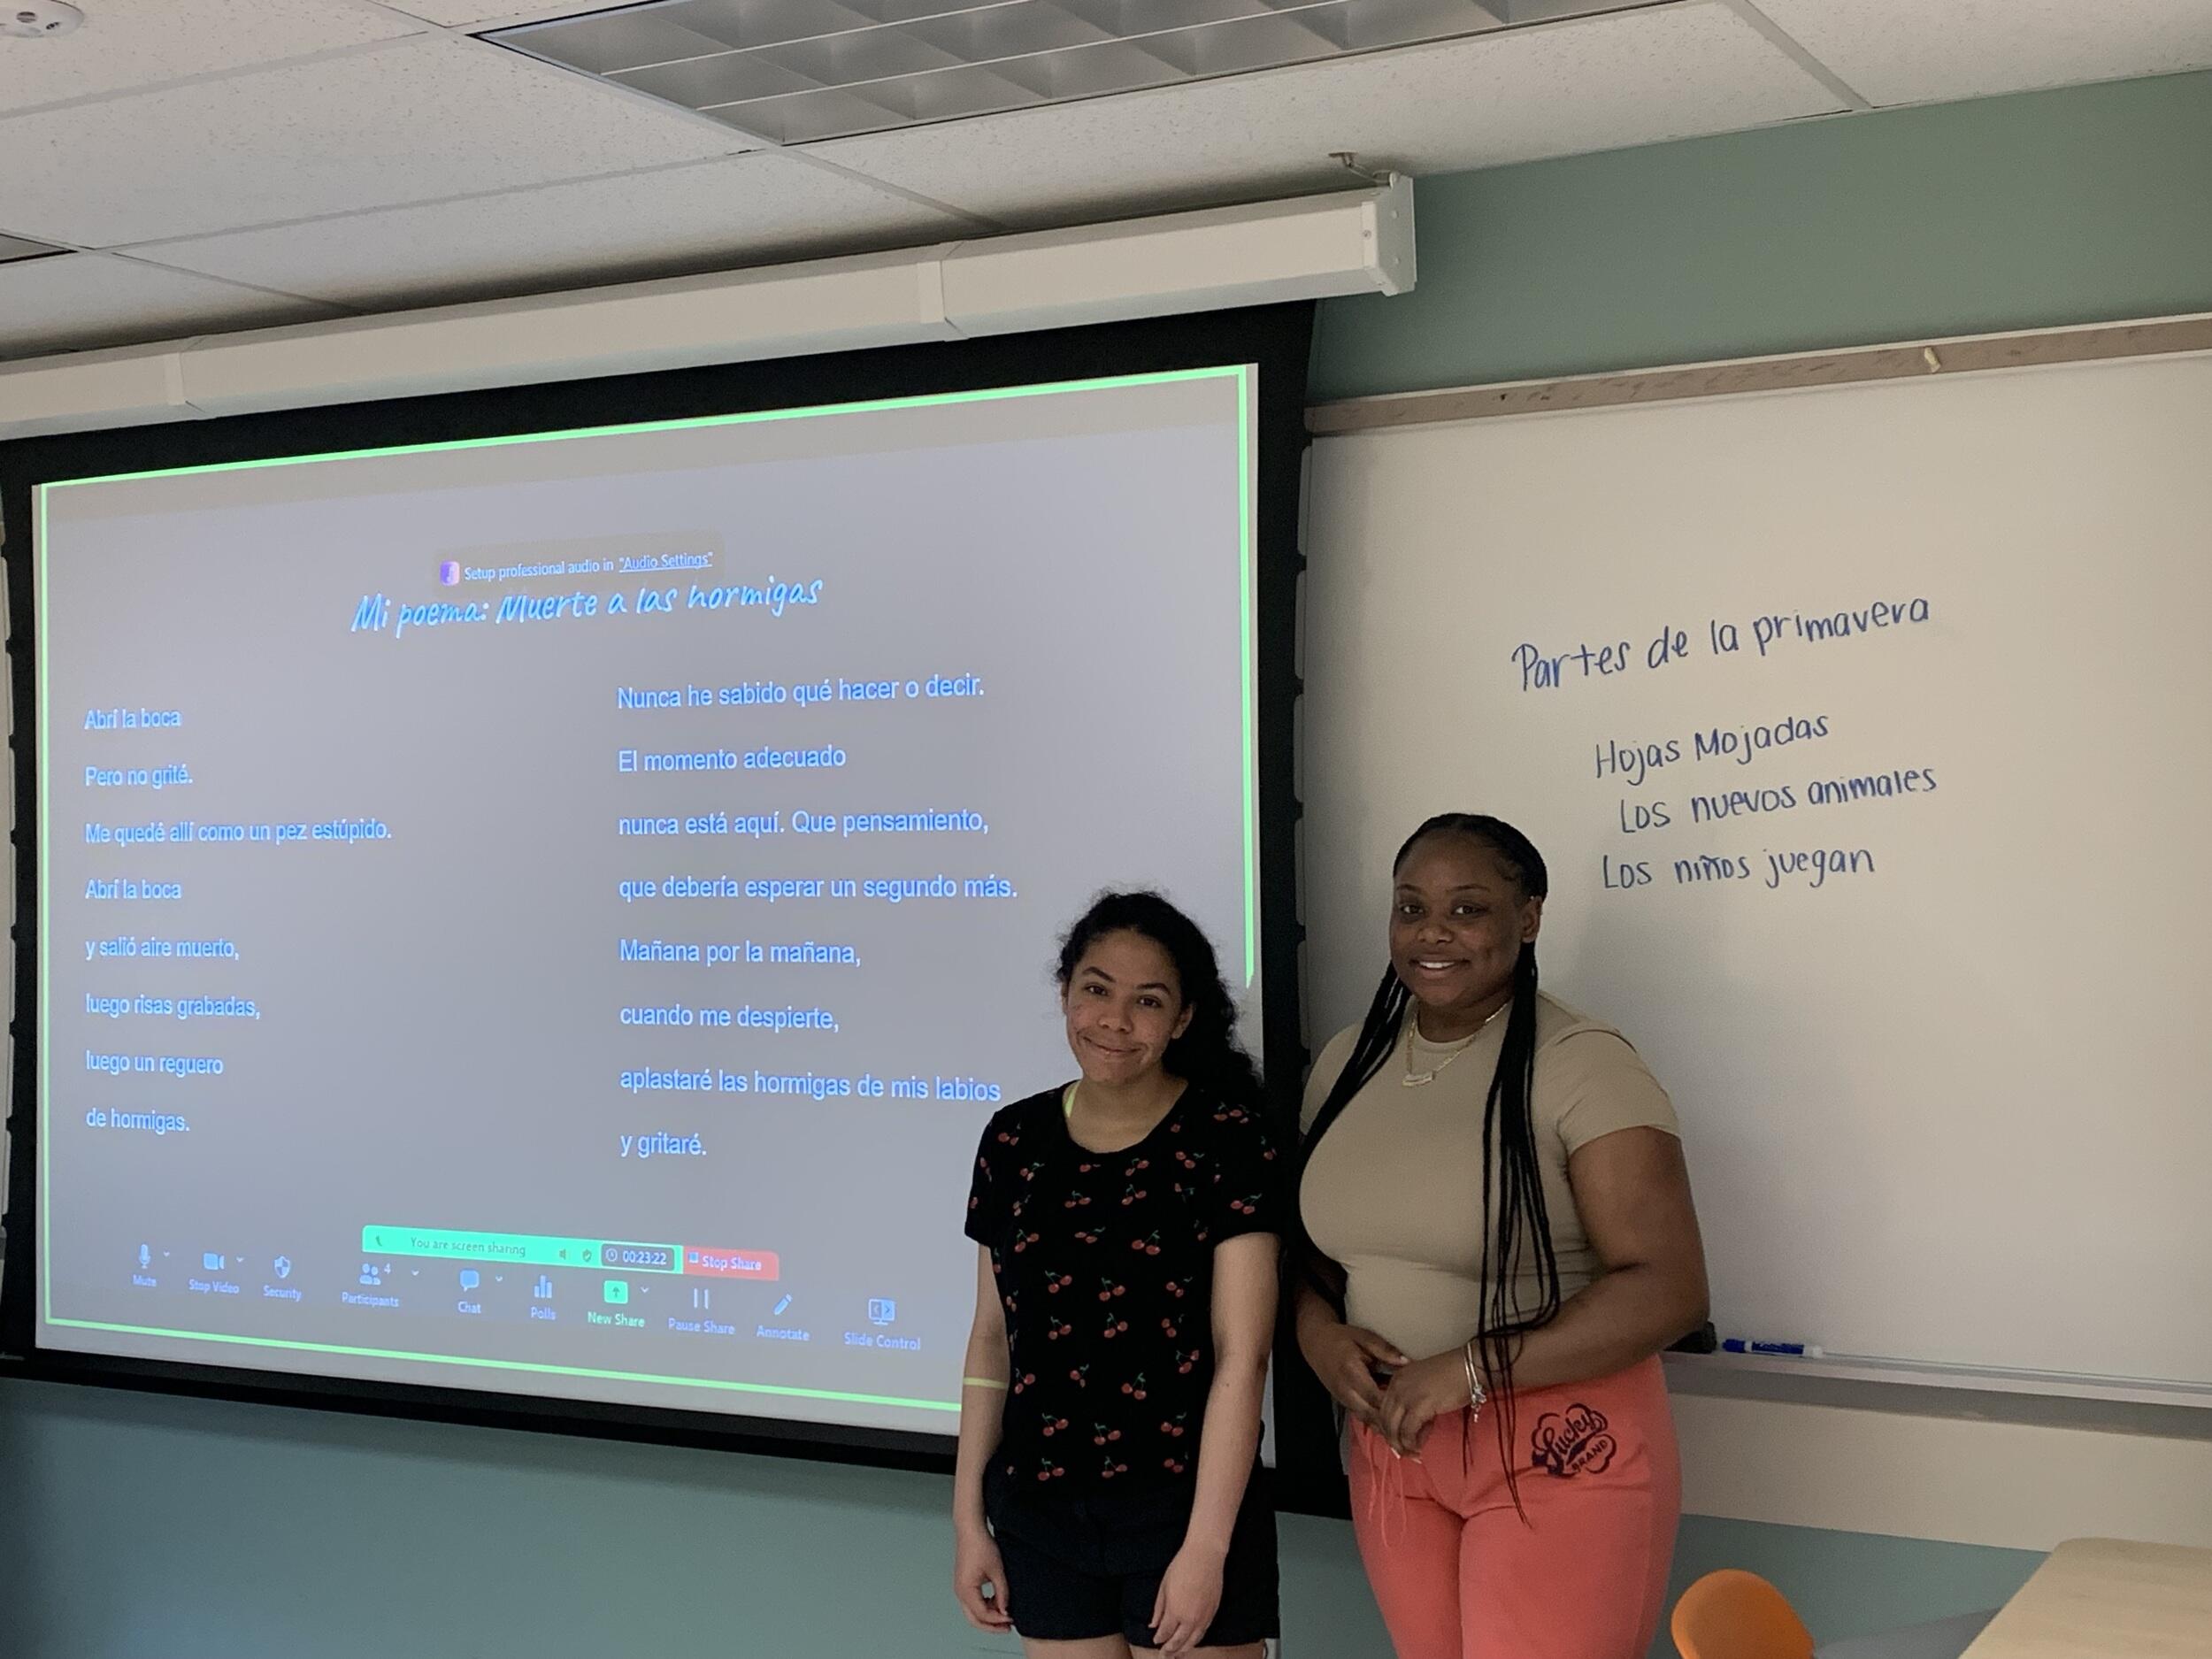 Two women standing in front of a white board and projector screen. 